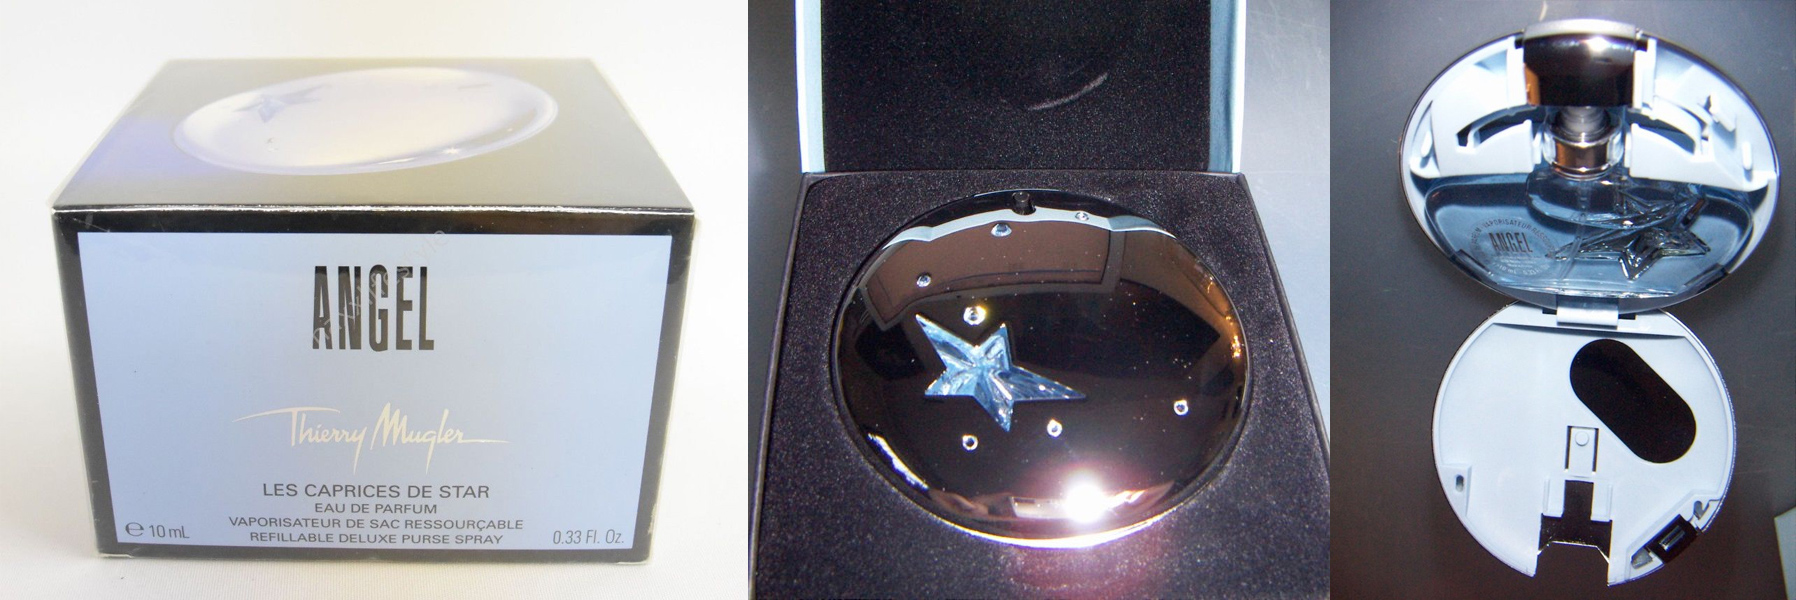 Thierry Mugler Angel Perfume Collector's Limited Edition 2005 Caprice de Star Purse Spray Box Plastic